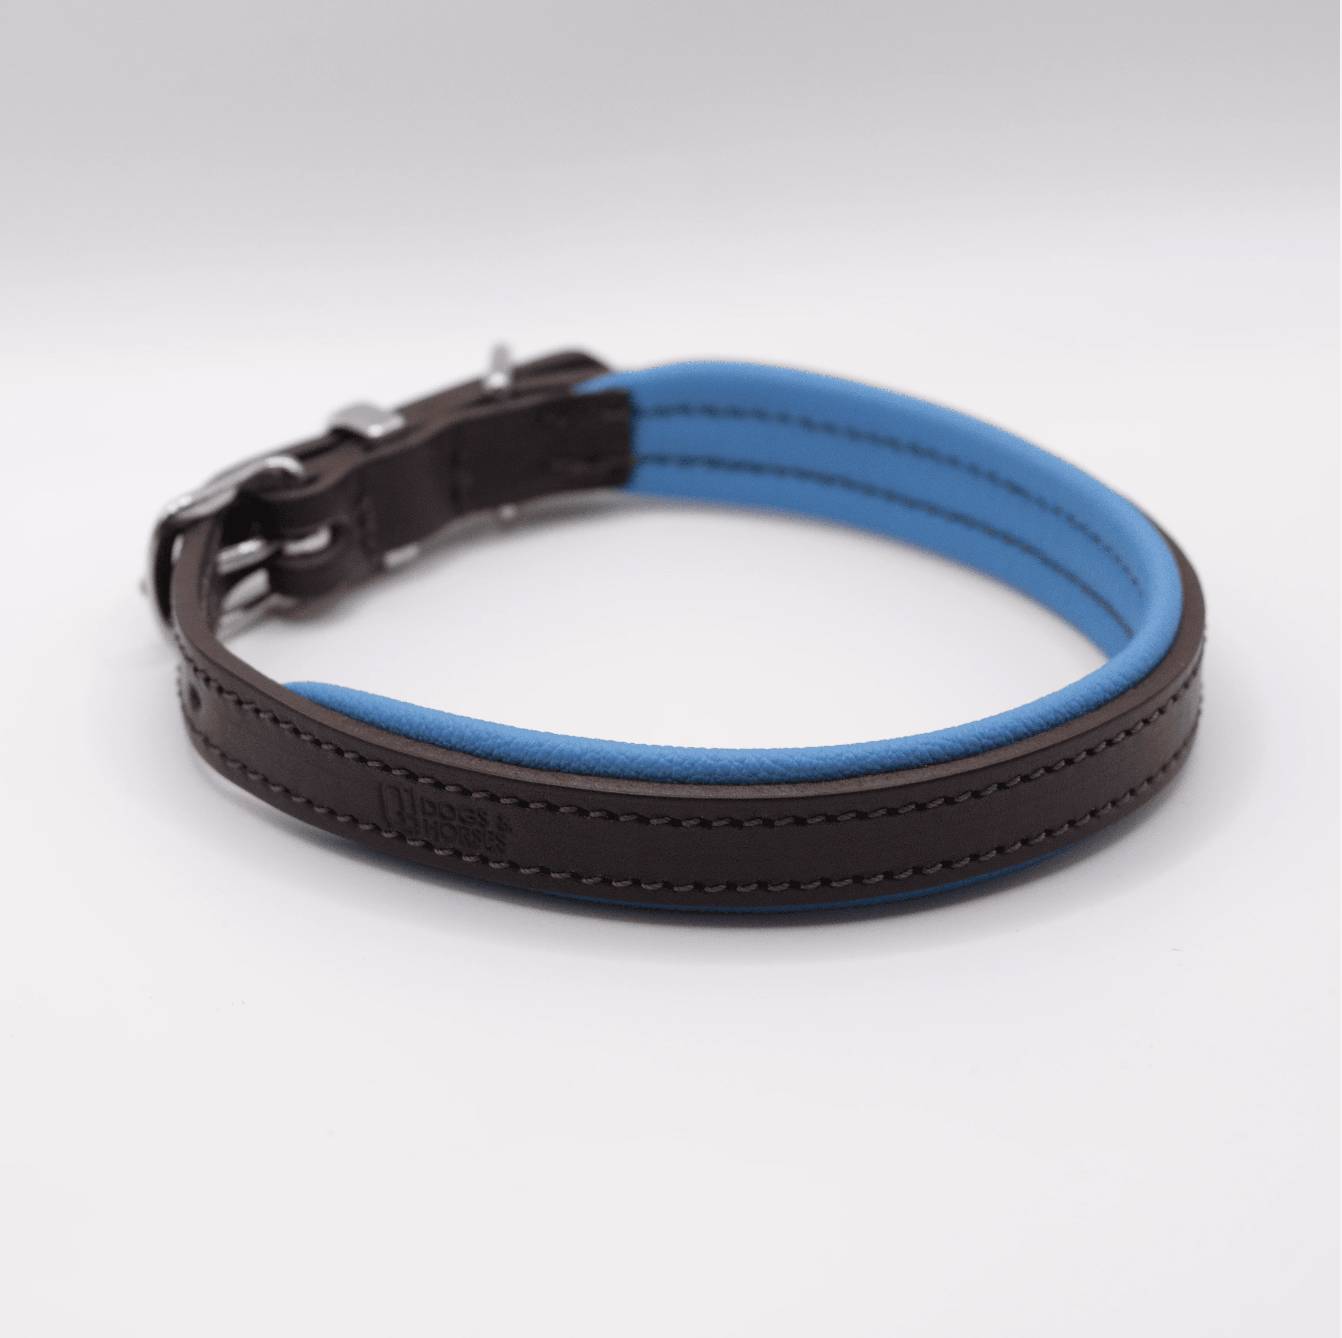 Padded Leather Dog Collar Brown and Blue